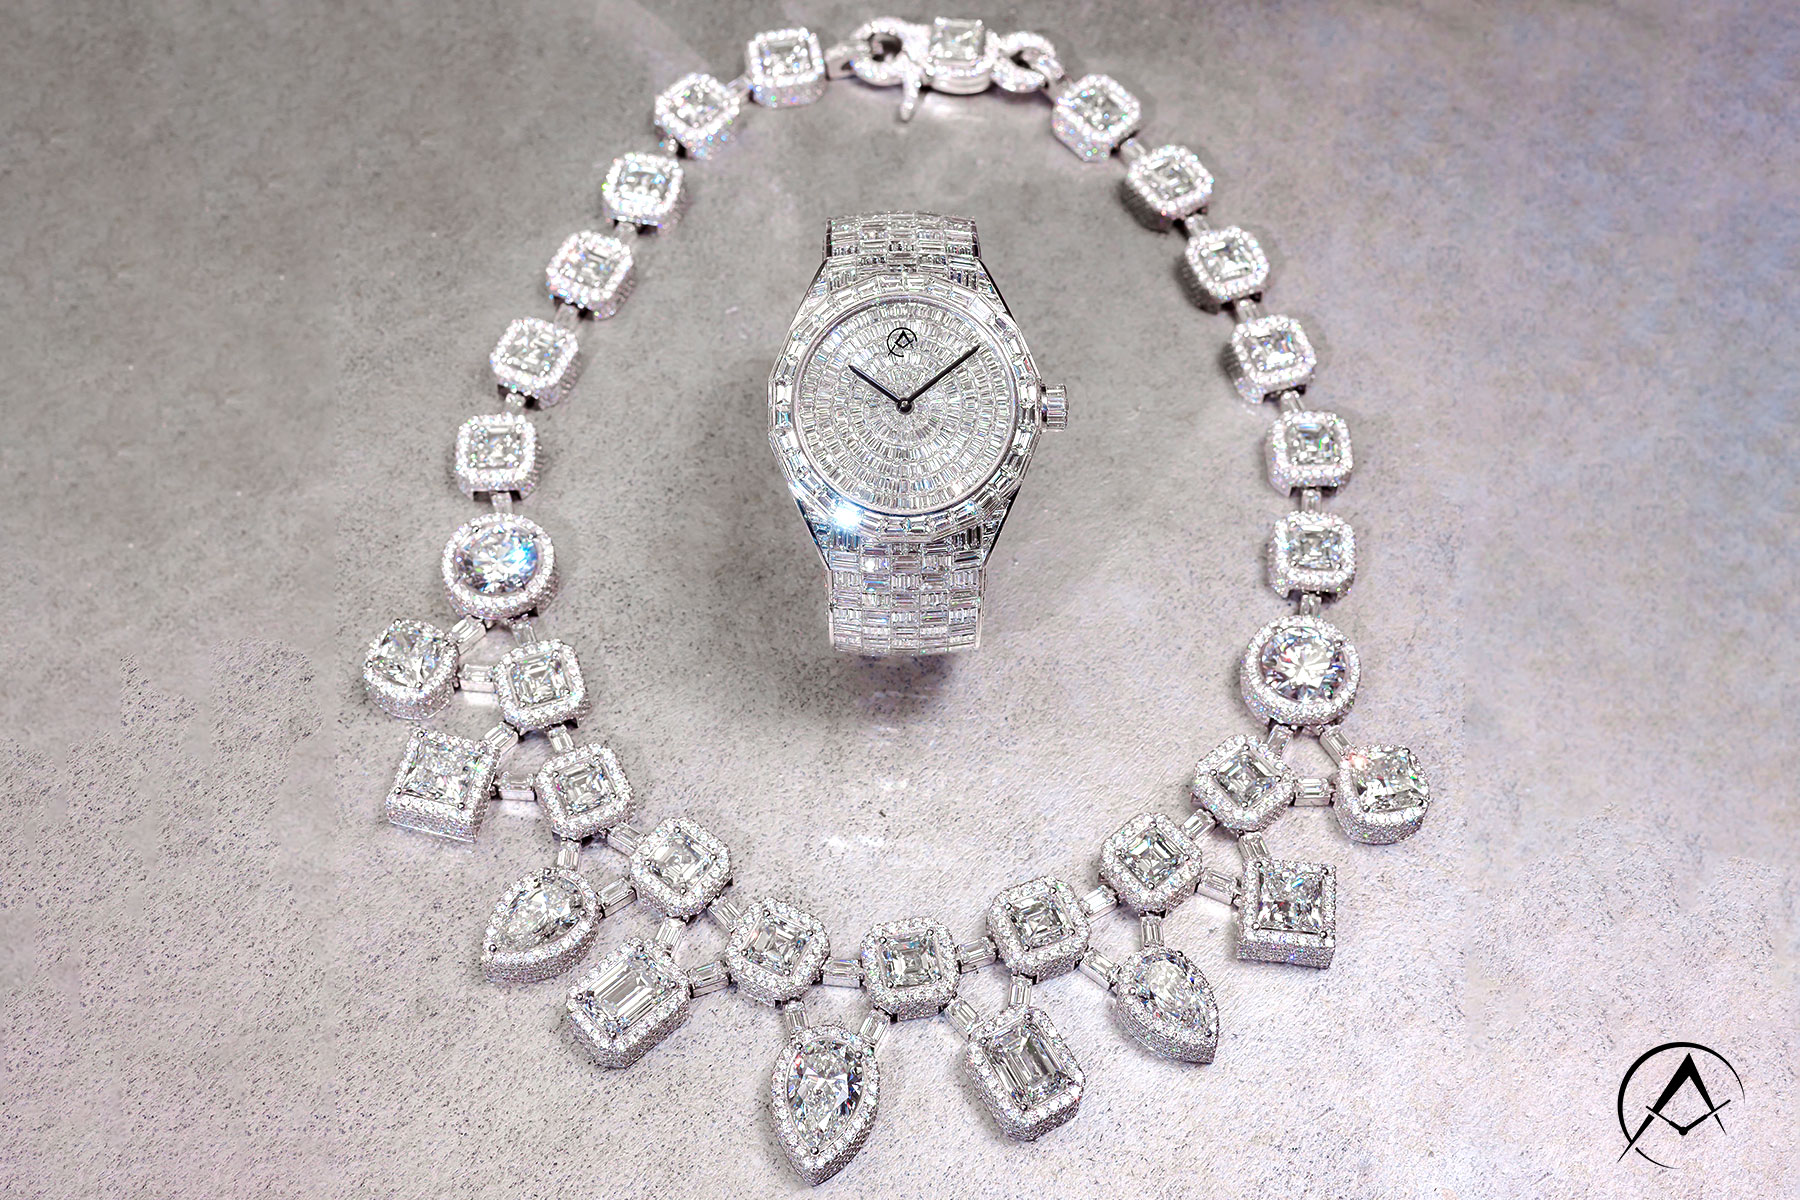 Legendary Celebrities such as Bad Bunny and Rick Ross have Worn this Diamond-Pave Chain, Which Lays Beside a Limited Edition Avi & Co. Diamond-Pave Timepiece.